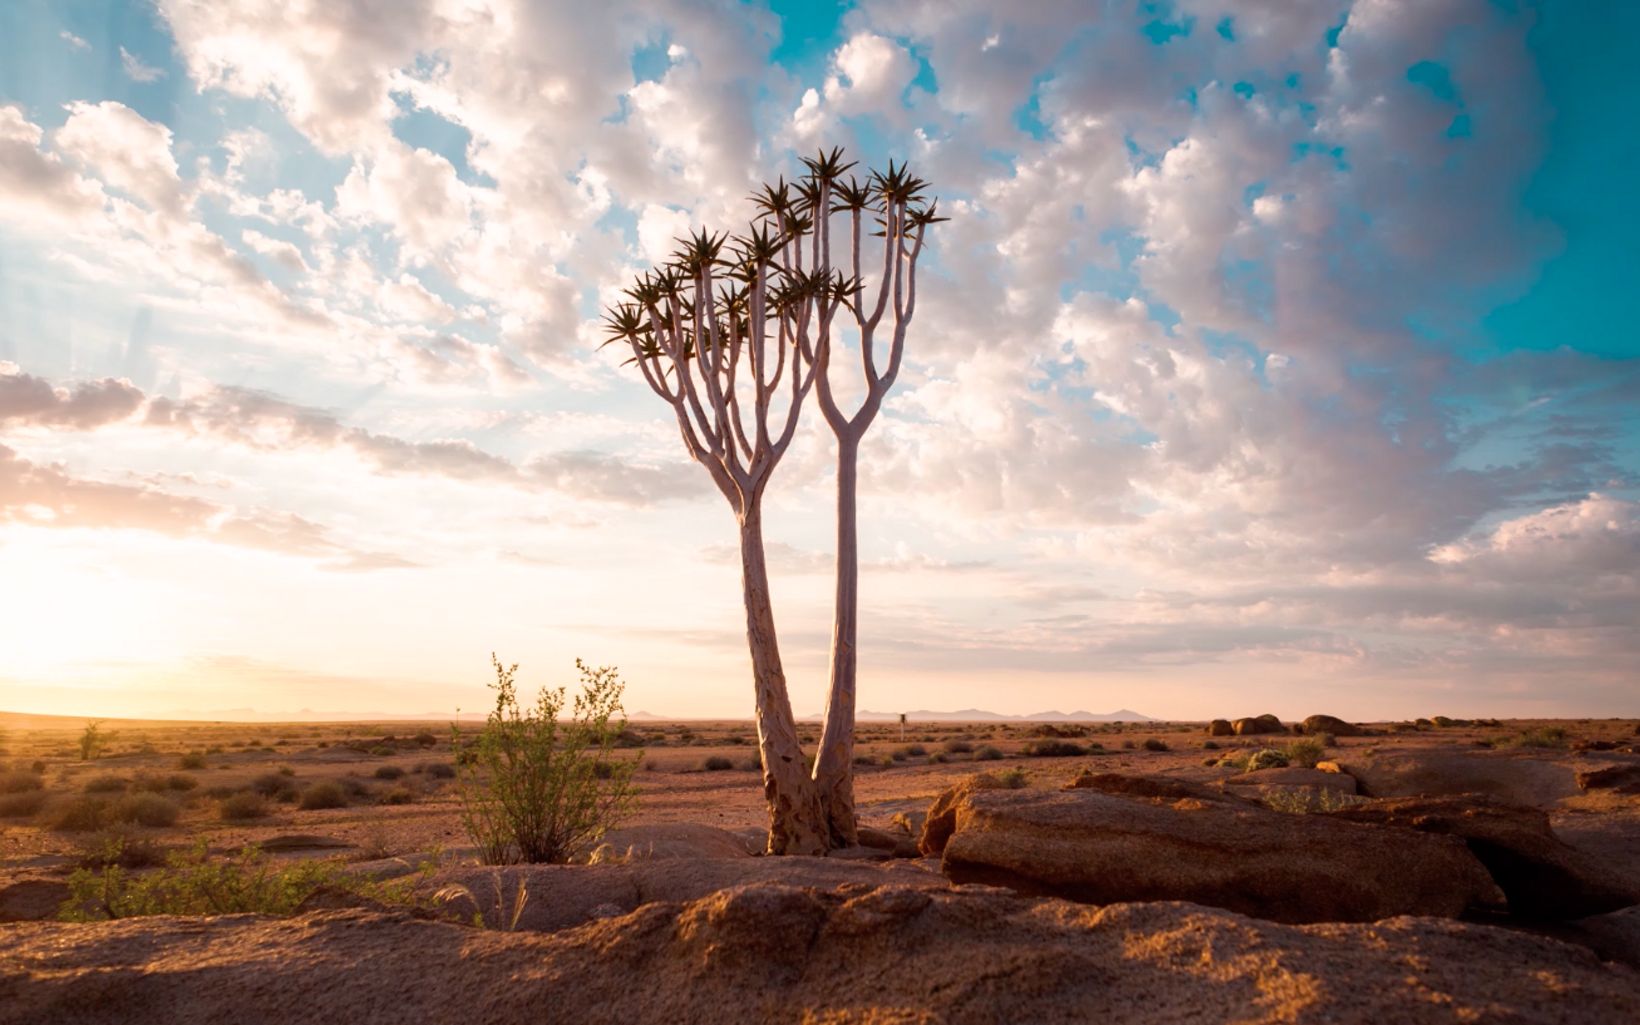 A tall tree stands in a desert setting against dramatic skies.